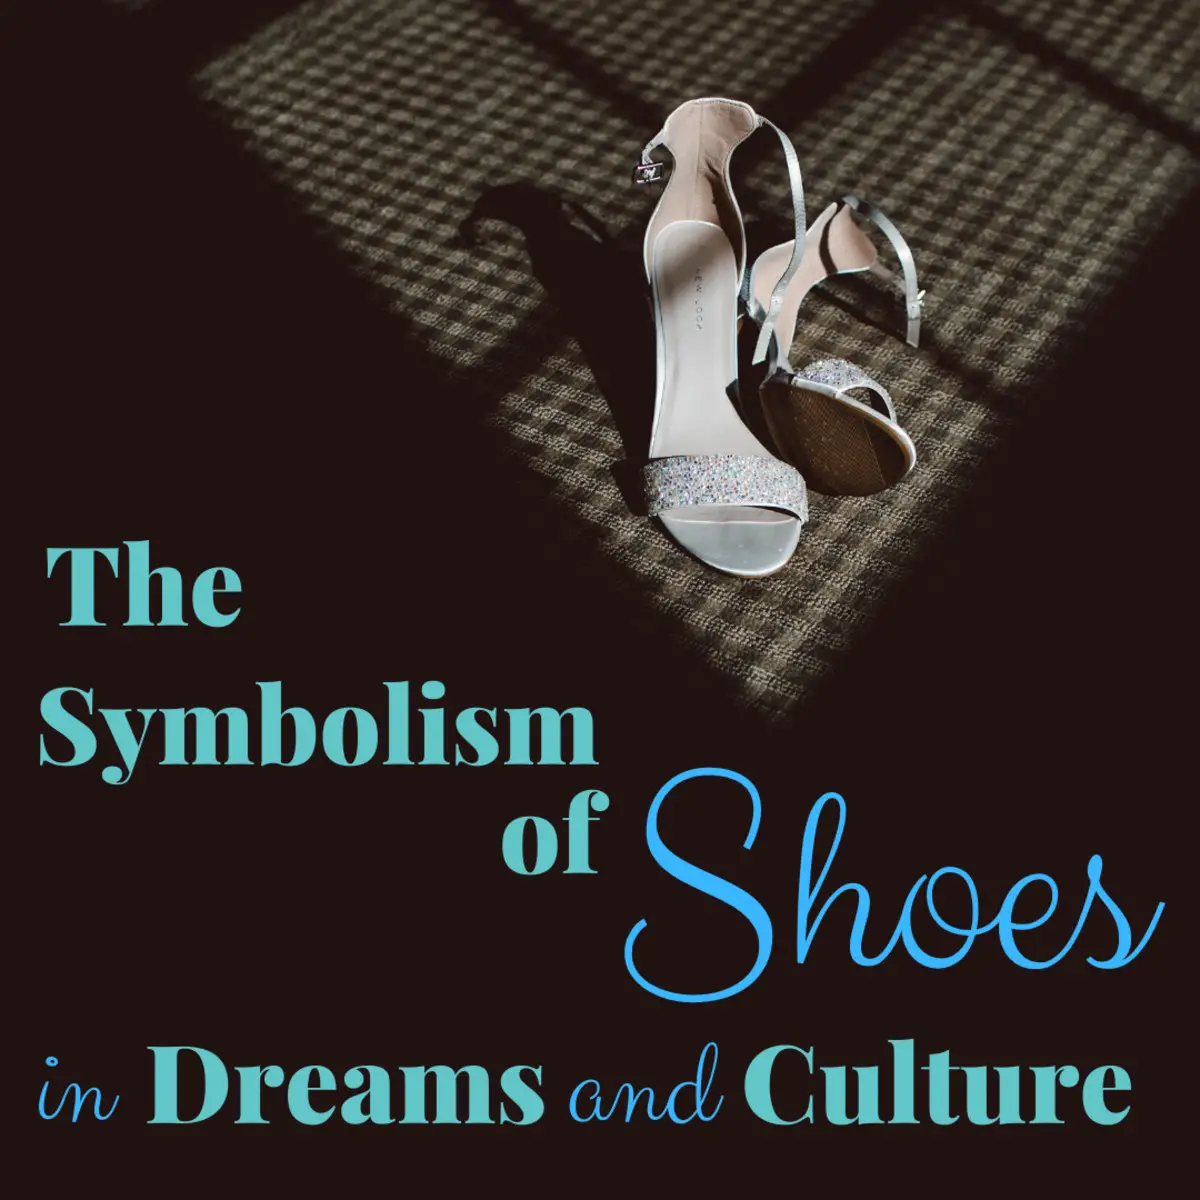 Dreams Involving Shoes And Relationships